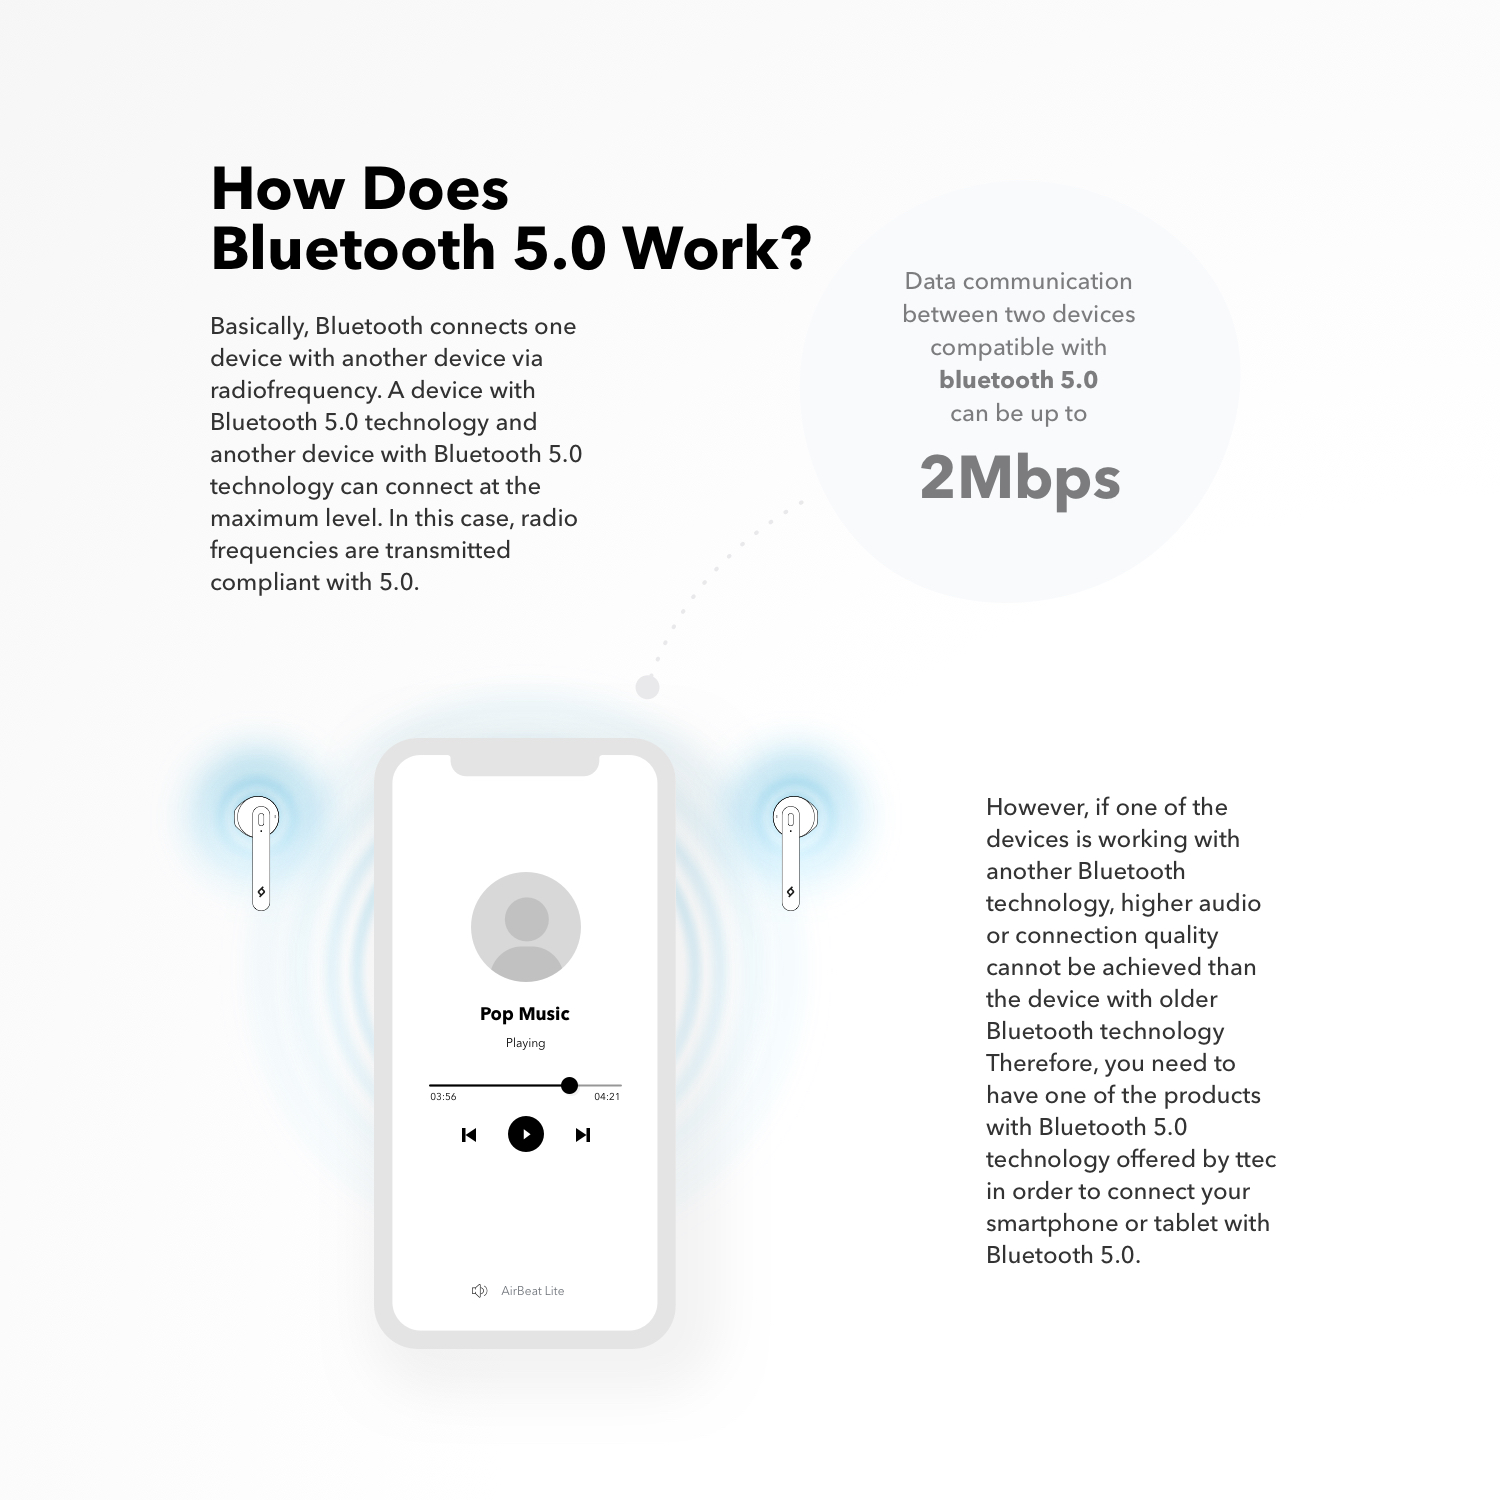 How does bluetooth 5.0 work ?